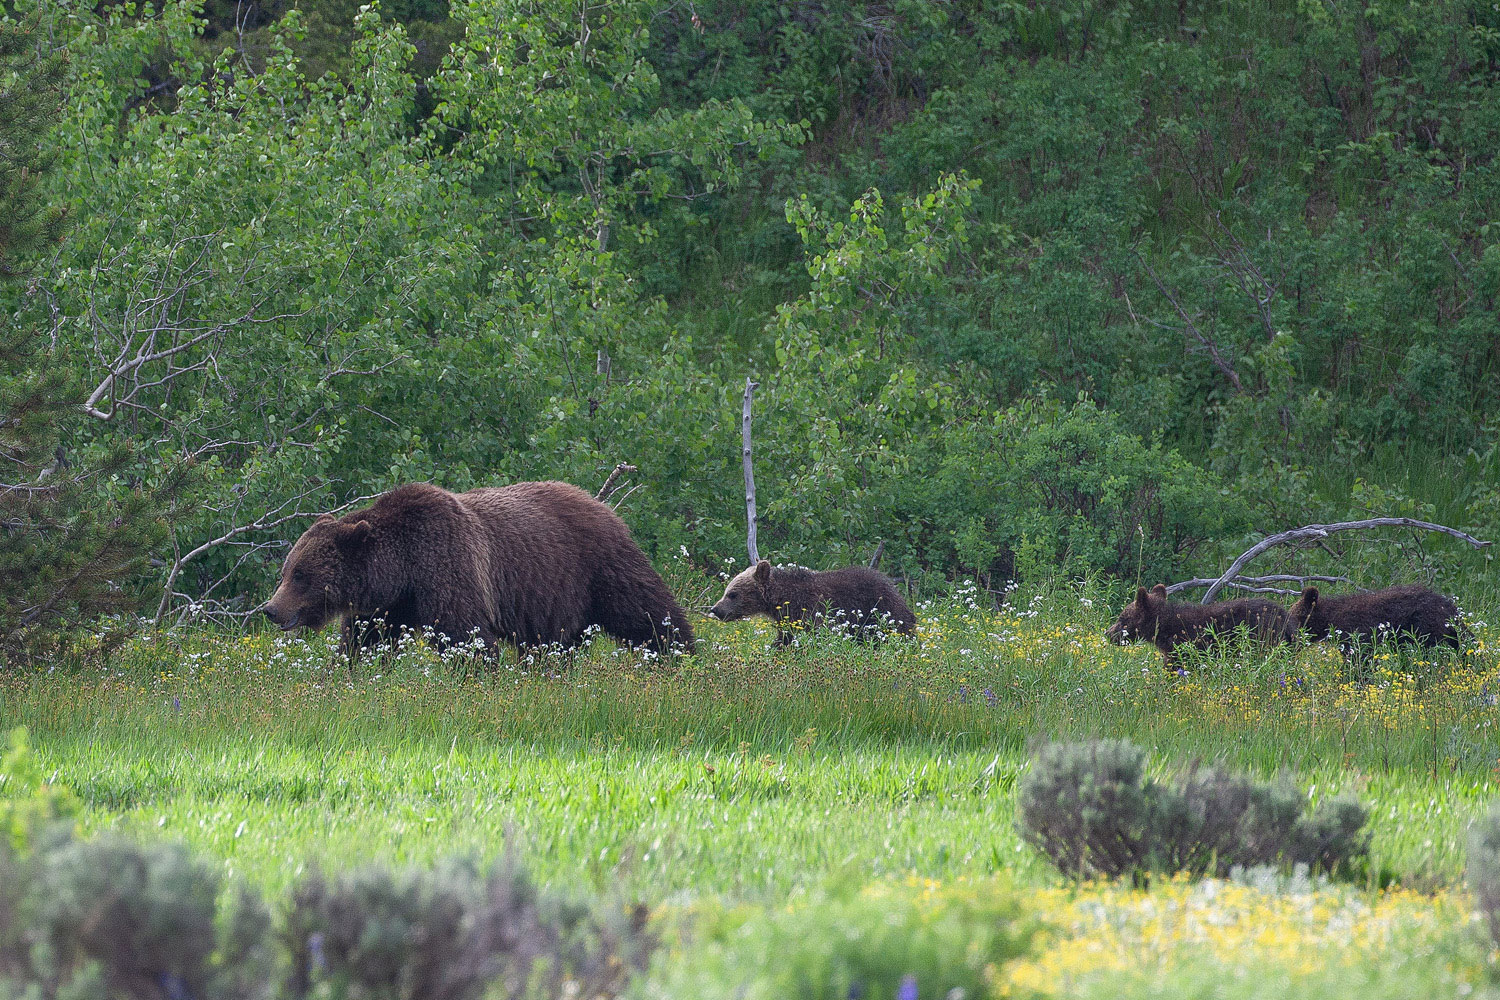 Grizzly matriarch 399 leads her three young cubs across the meadow and into the forest where they will spend the majority of...